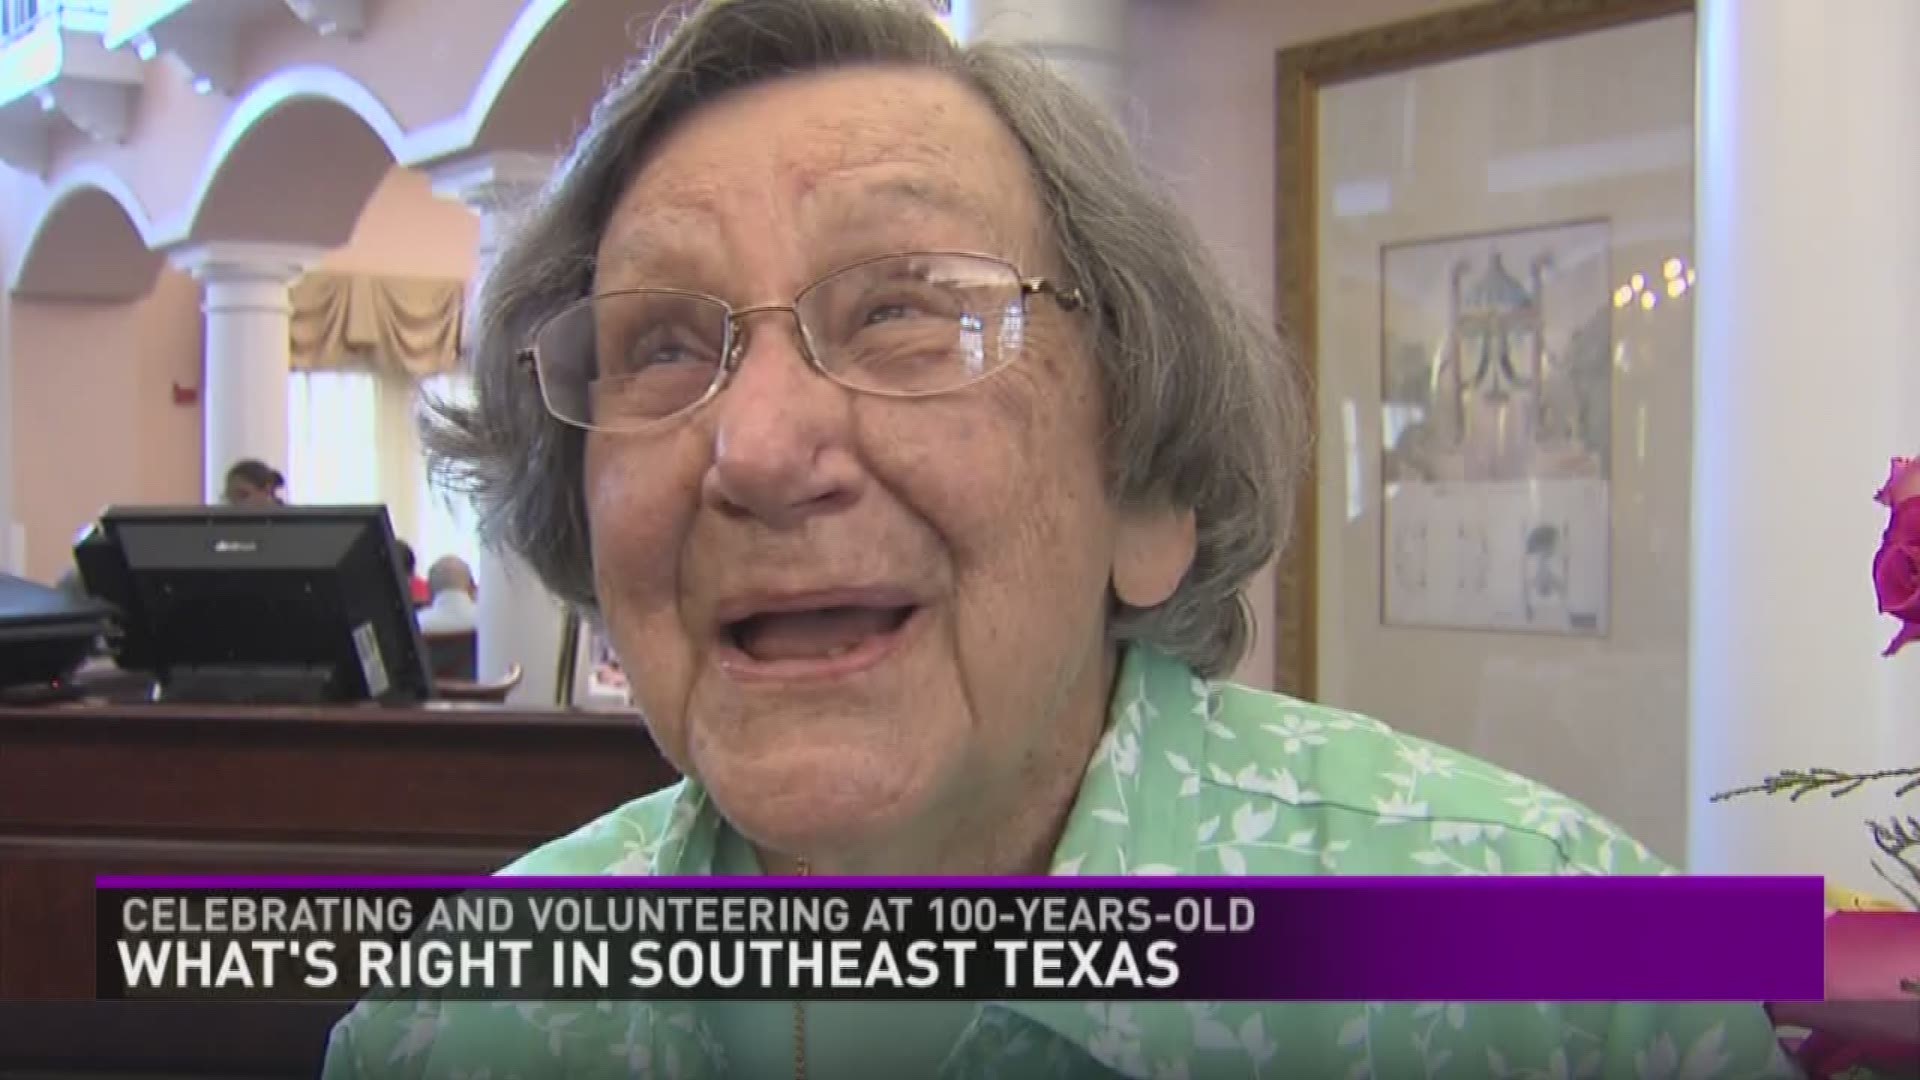 Woman turns 100! She still drives and volunteers! She's "what's right in Southeast Texas!"